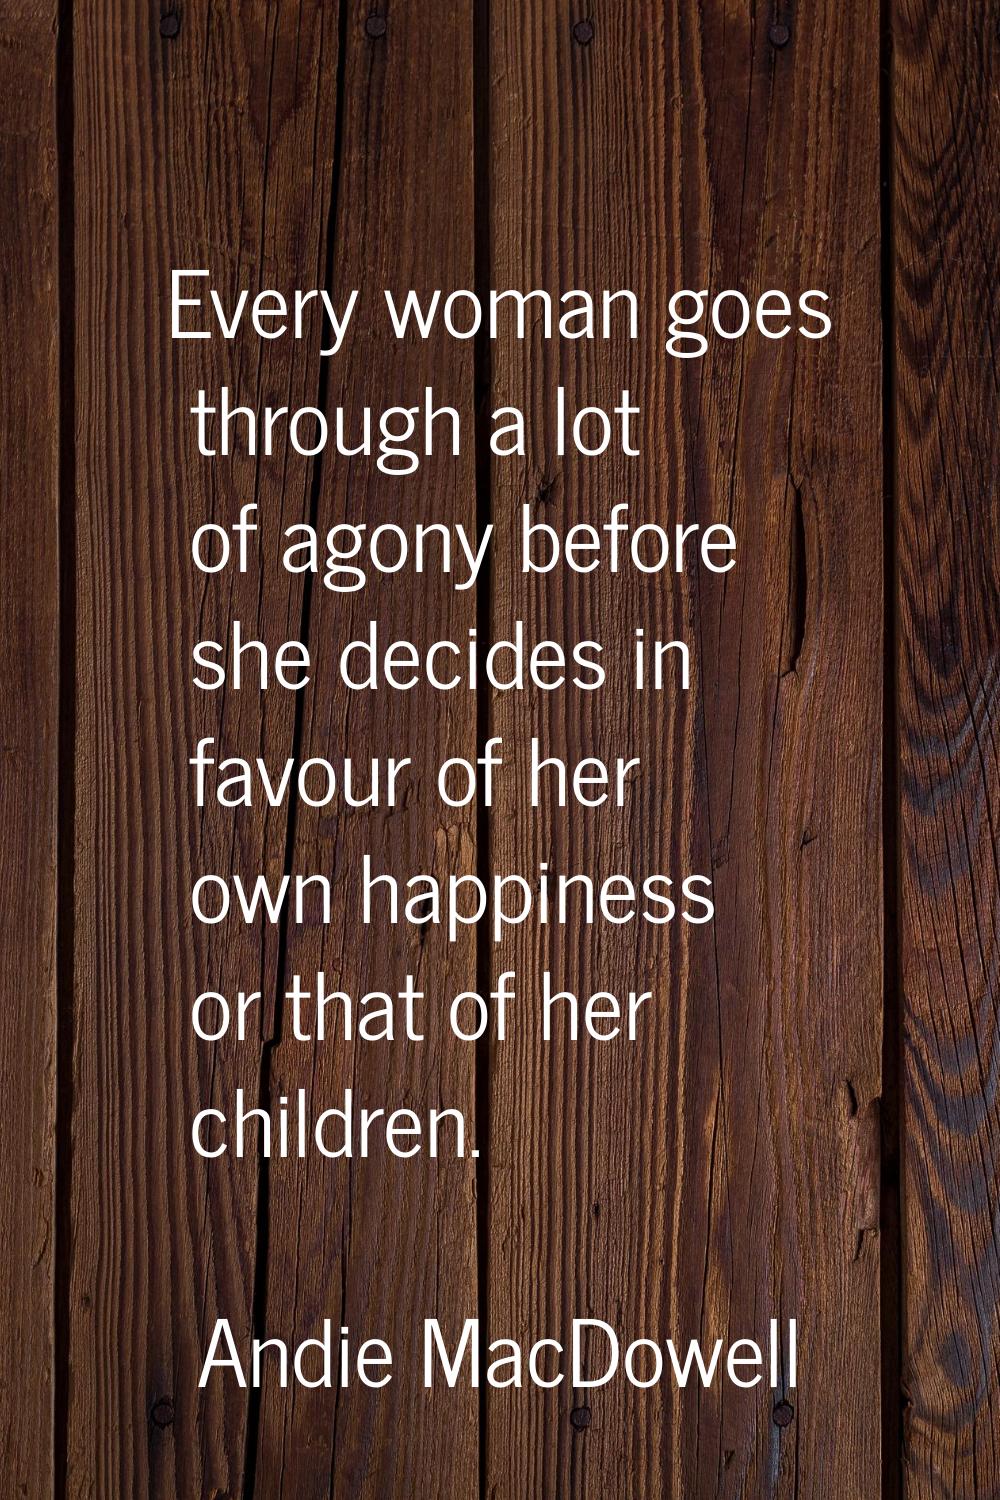 Every woman goes through a lot of agony before she decides in favour of her own happiness or that o